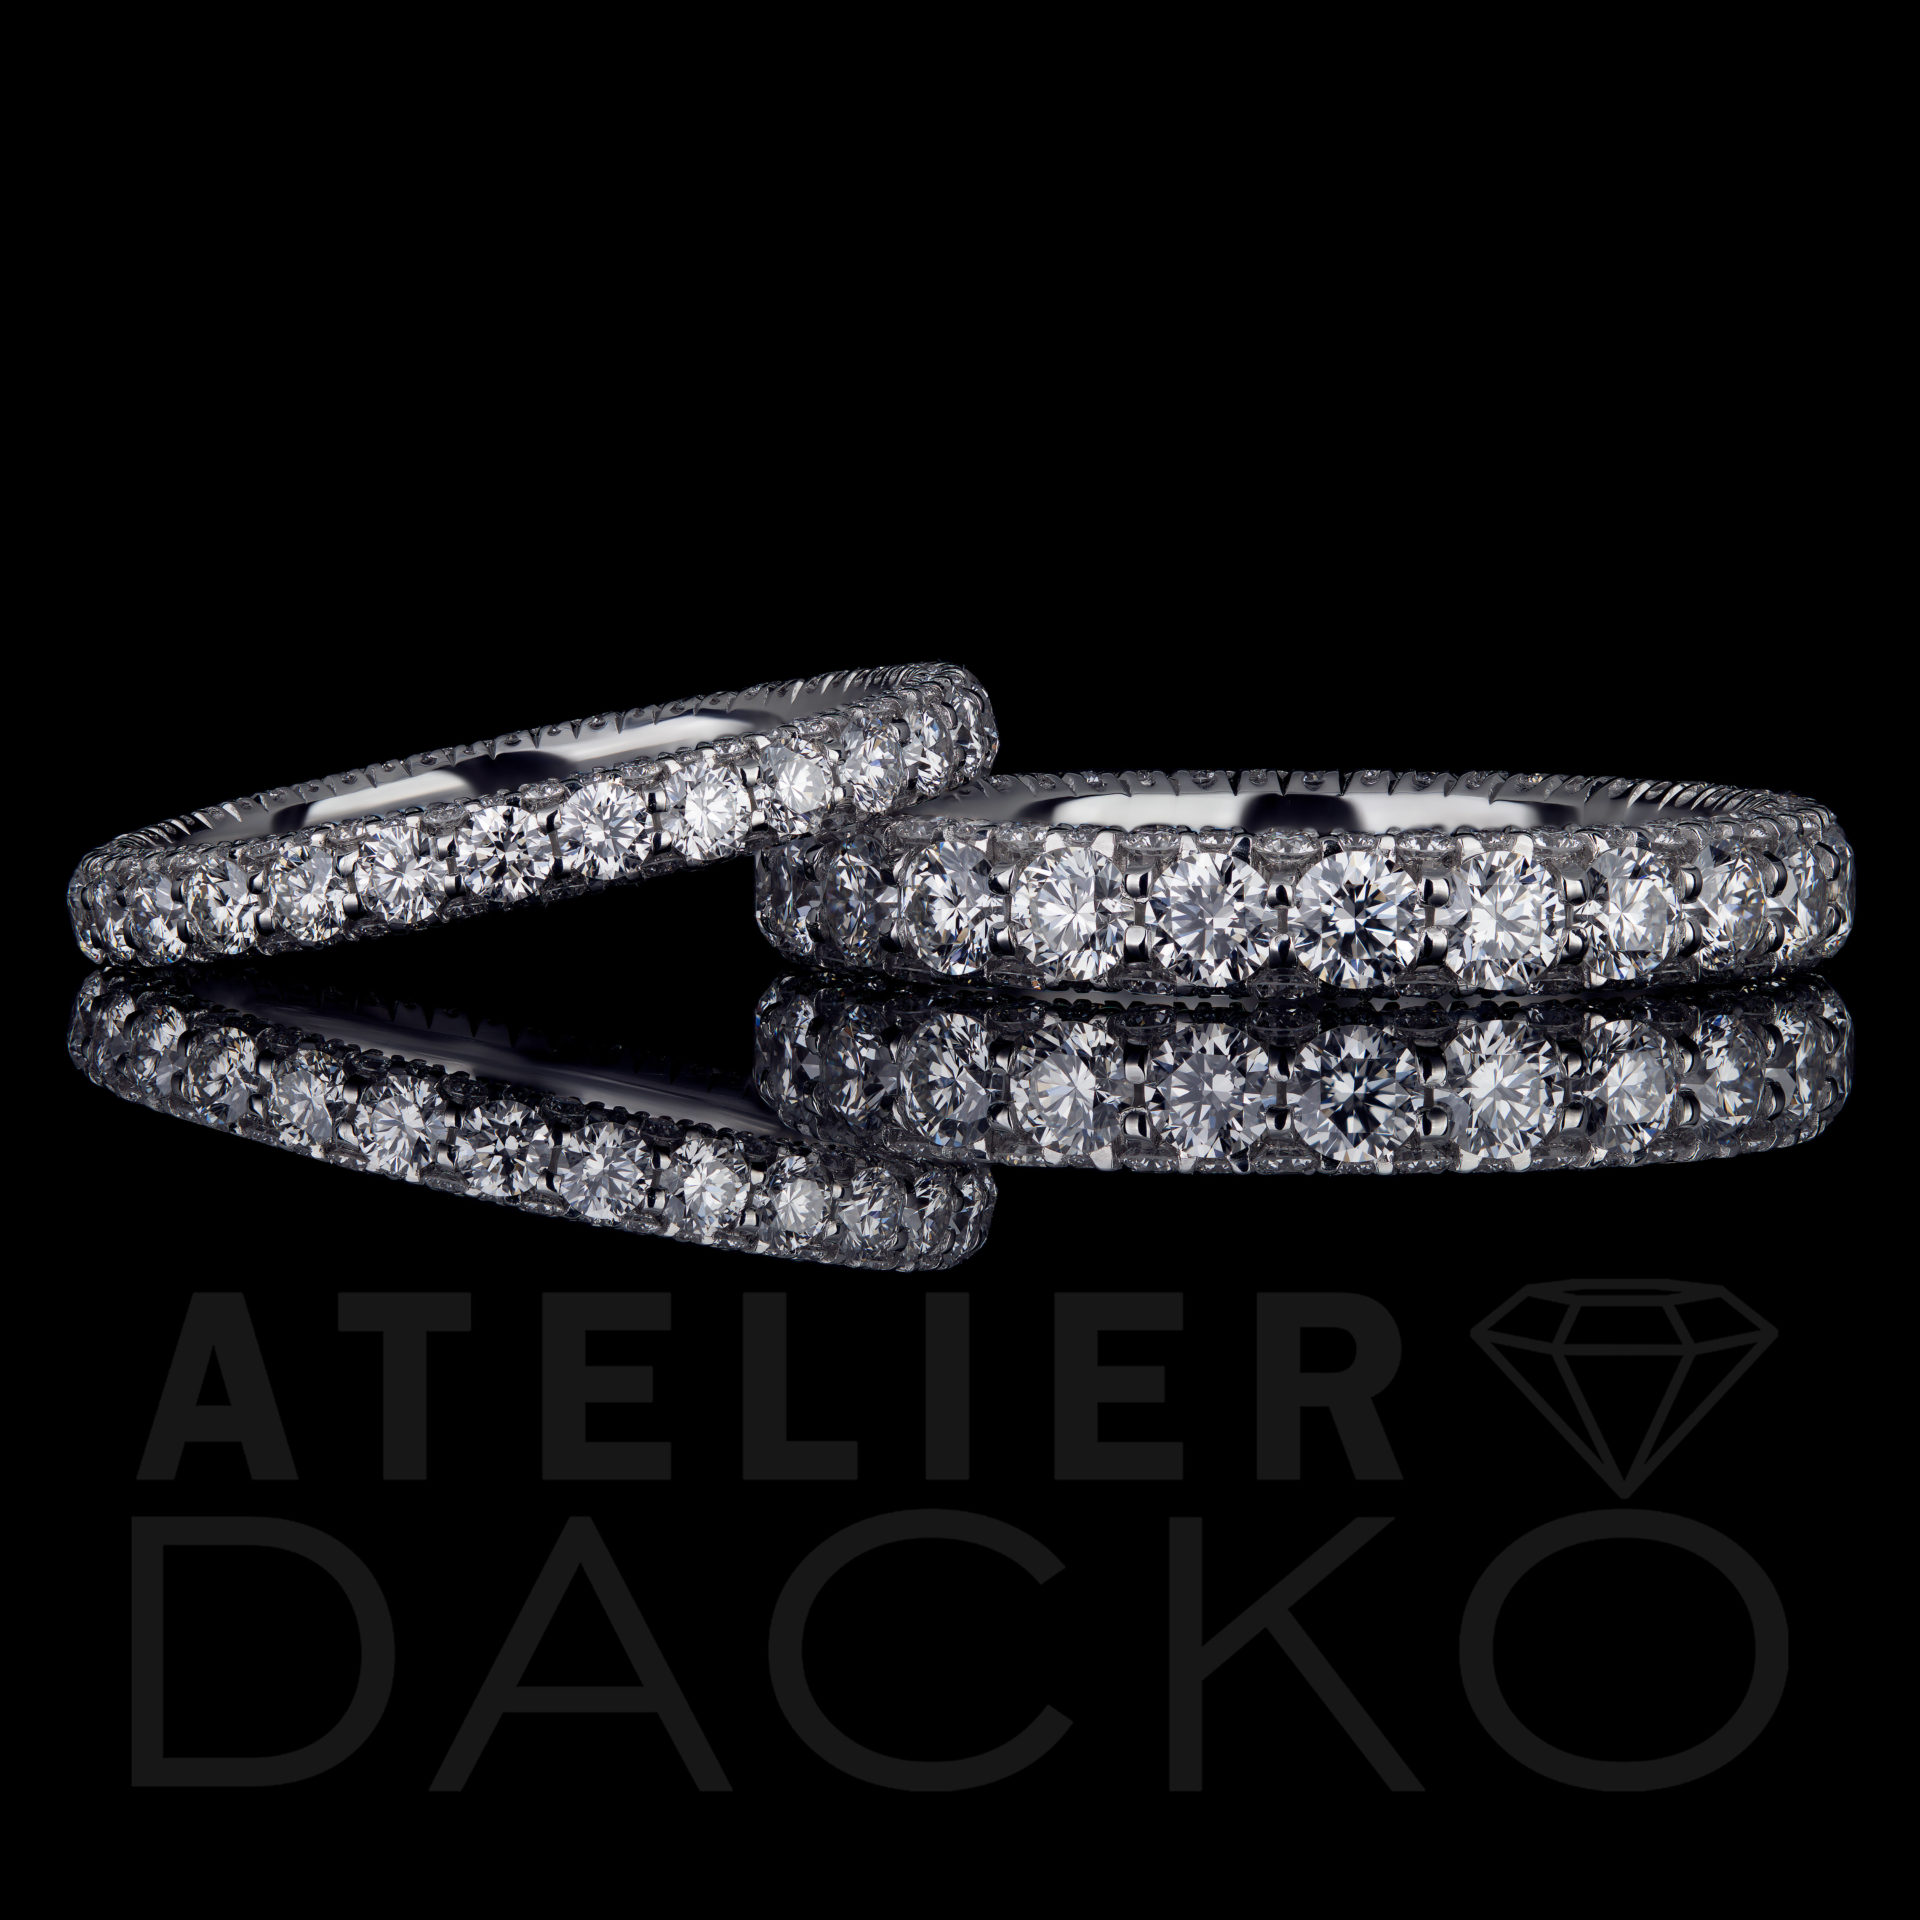 AD015 - His and Hers 3-Sided Diamond Wedding Bands - 1